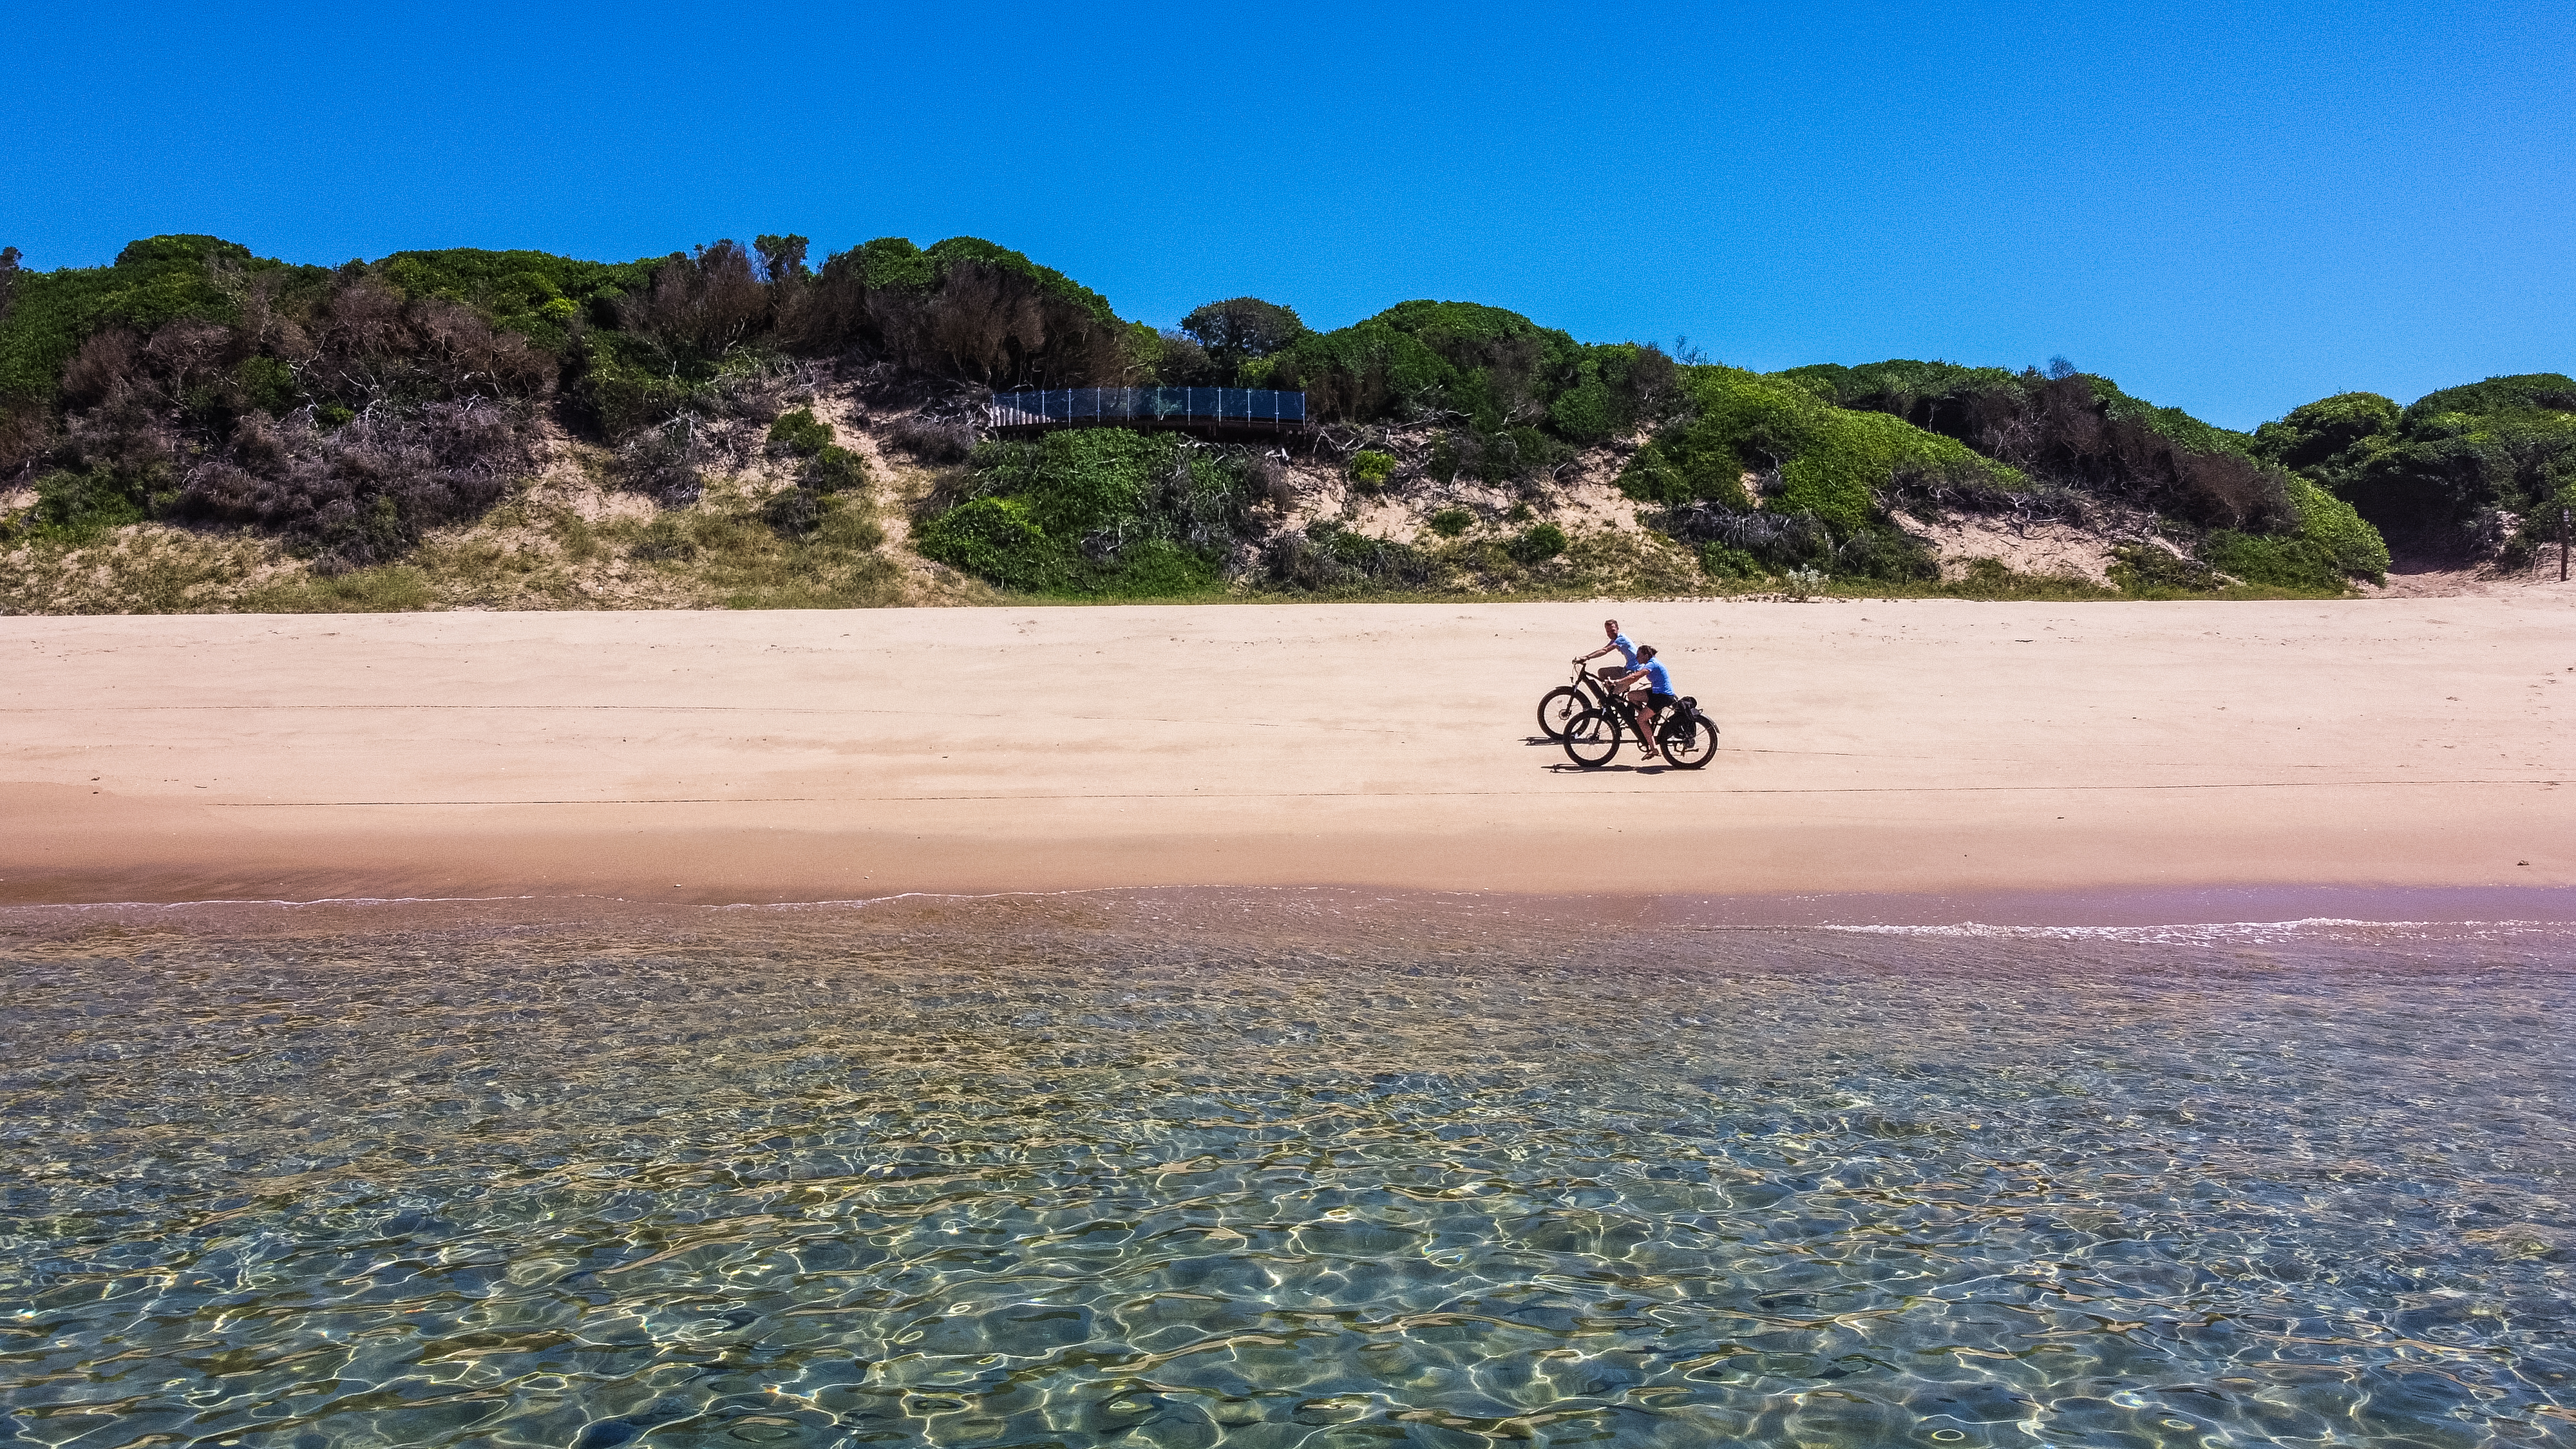 E-biking on the beach in front of Ponta Membene. Image: Supplied